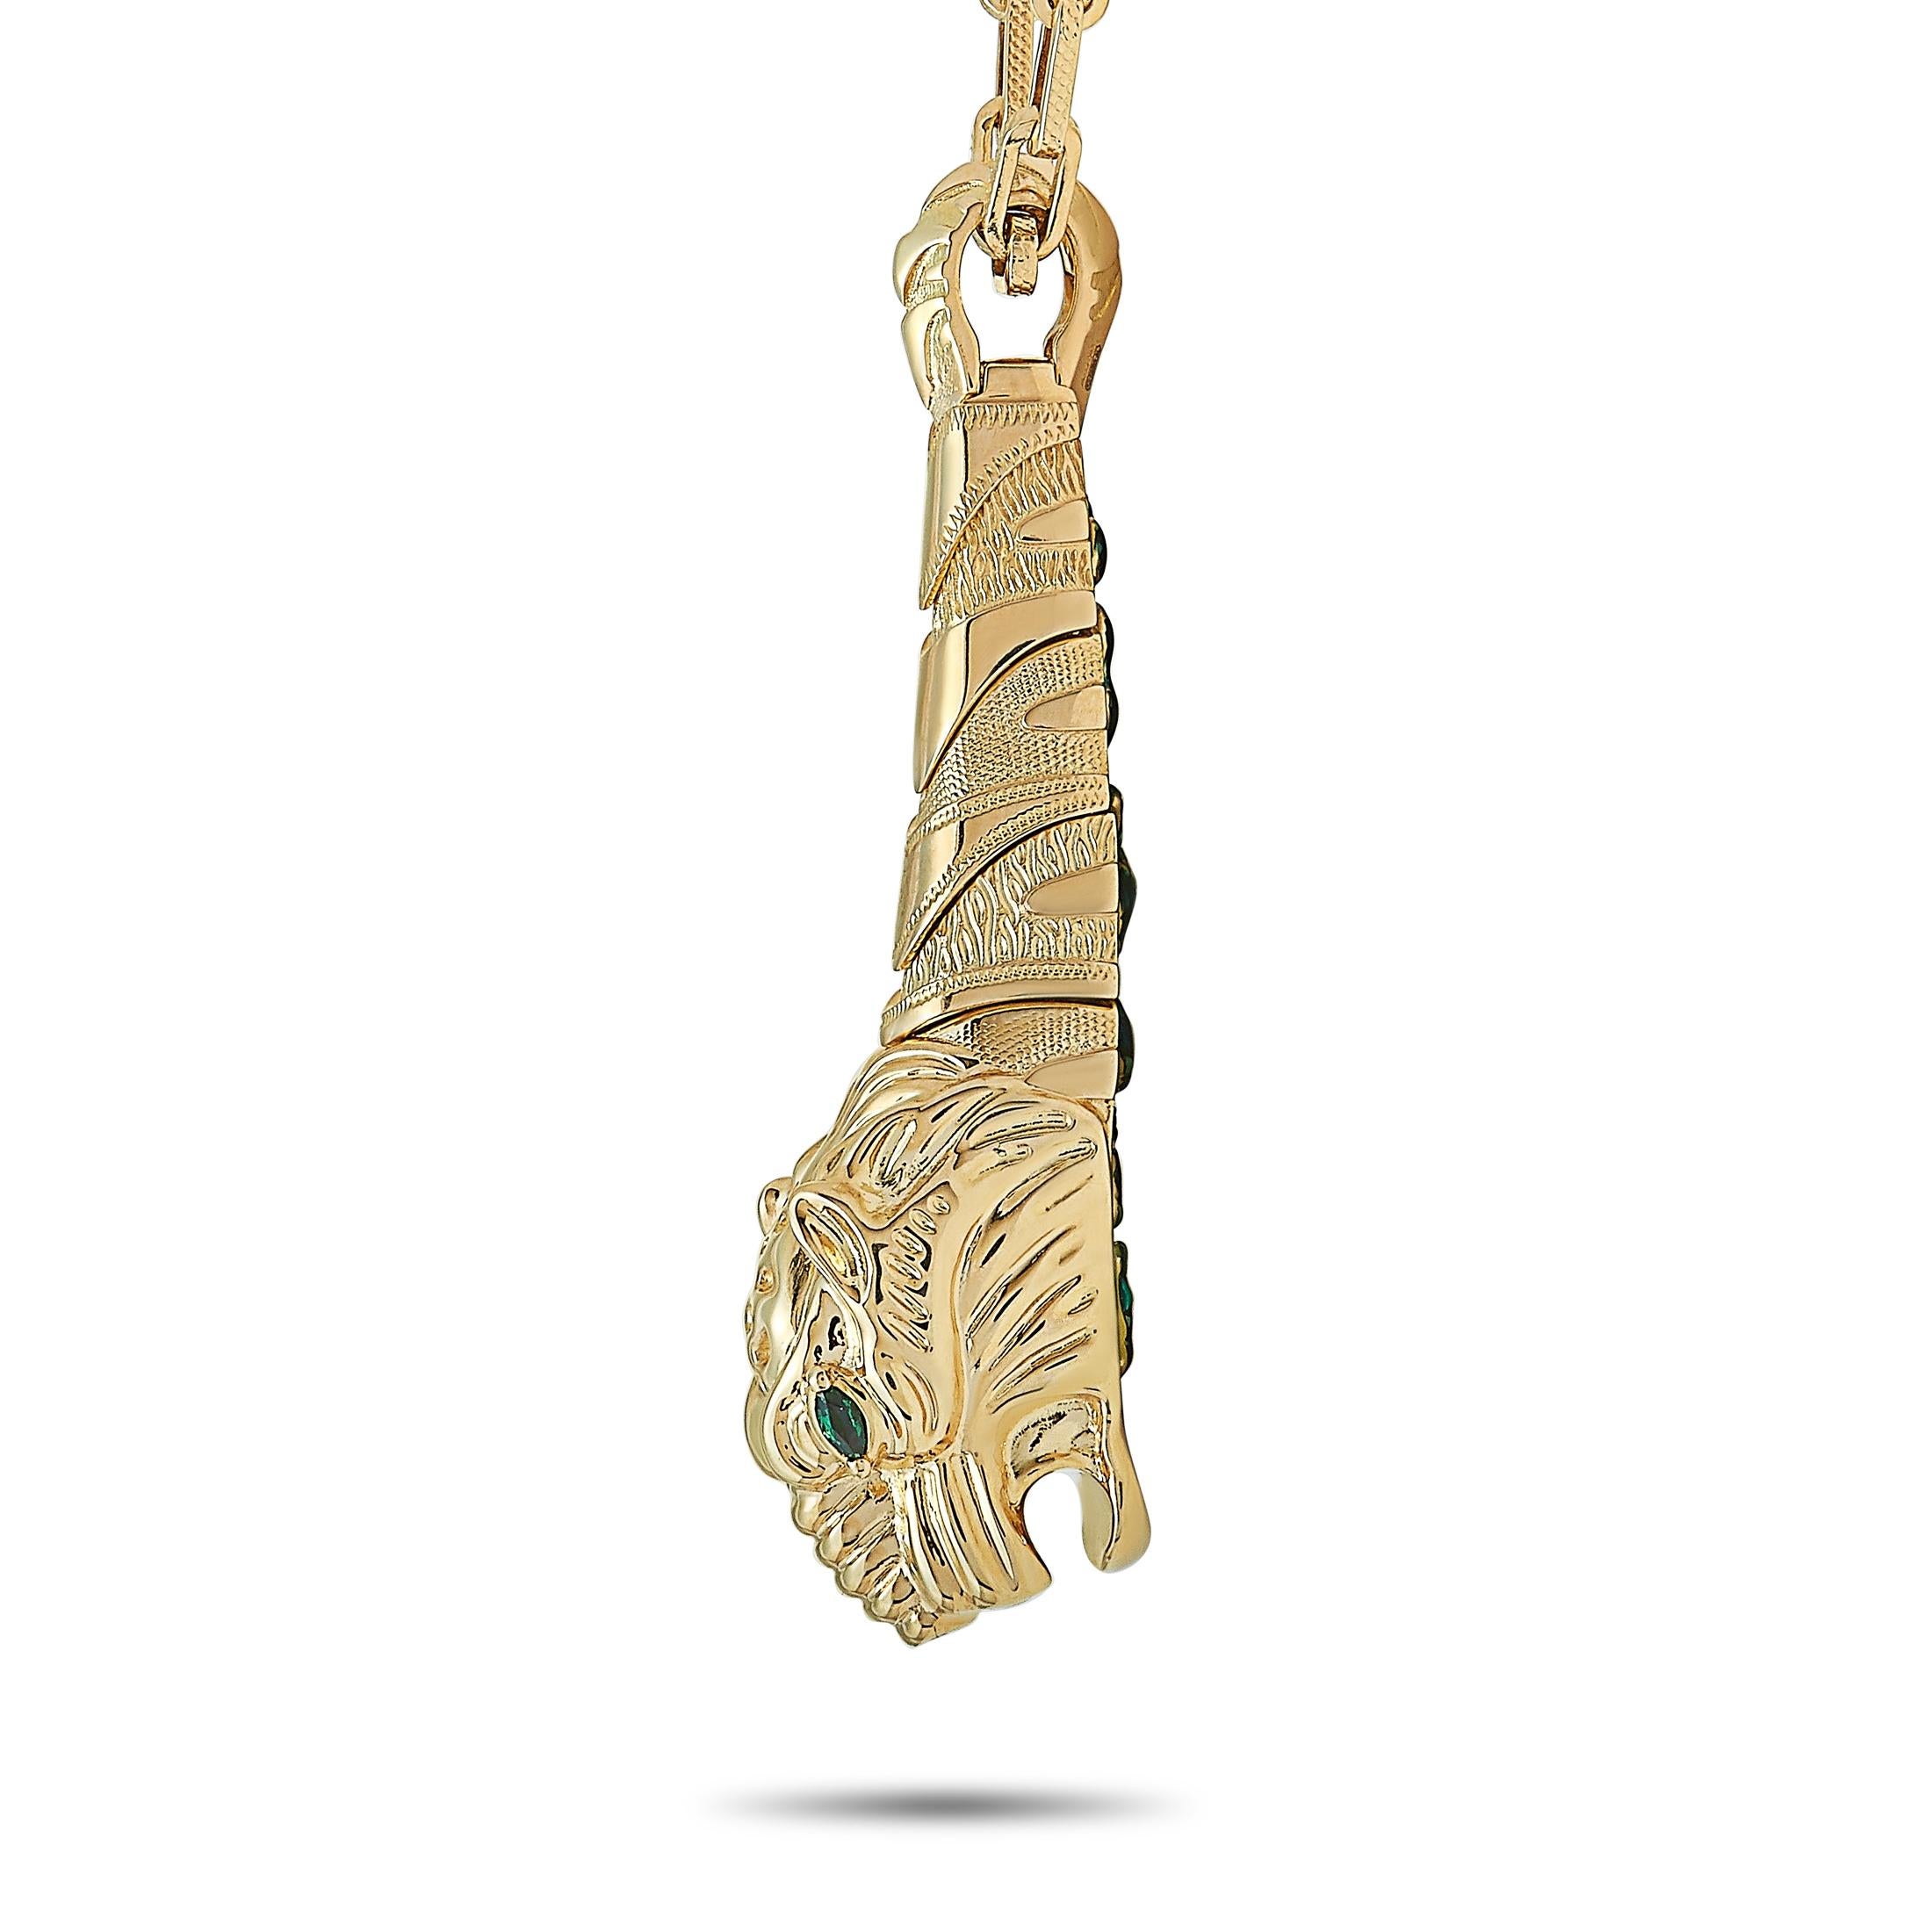 The Gucci “Dionysus” necklace is made of 18K yellow gold and weighs 2.5 grams. The necklace boasts a 26” chain and a pendant that measures 2.50” in length and 0.50” in width.
 
 This jewelry piece is offered in brand new condition and includes the